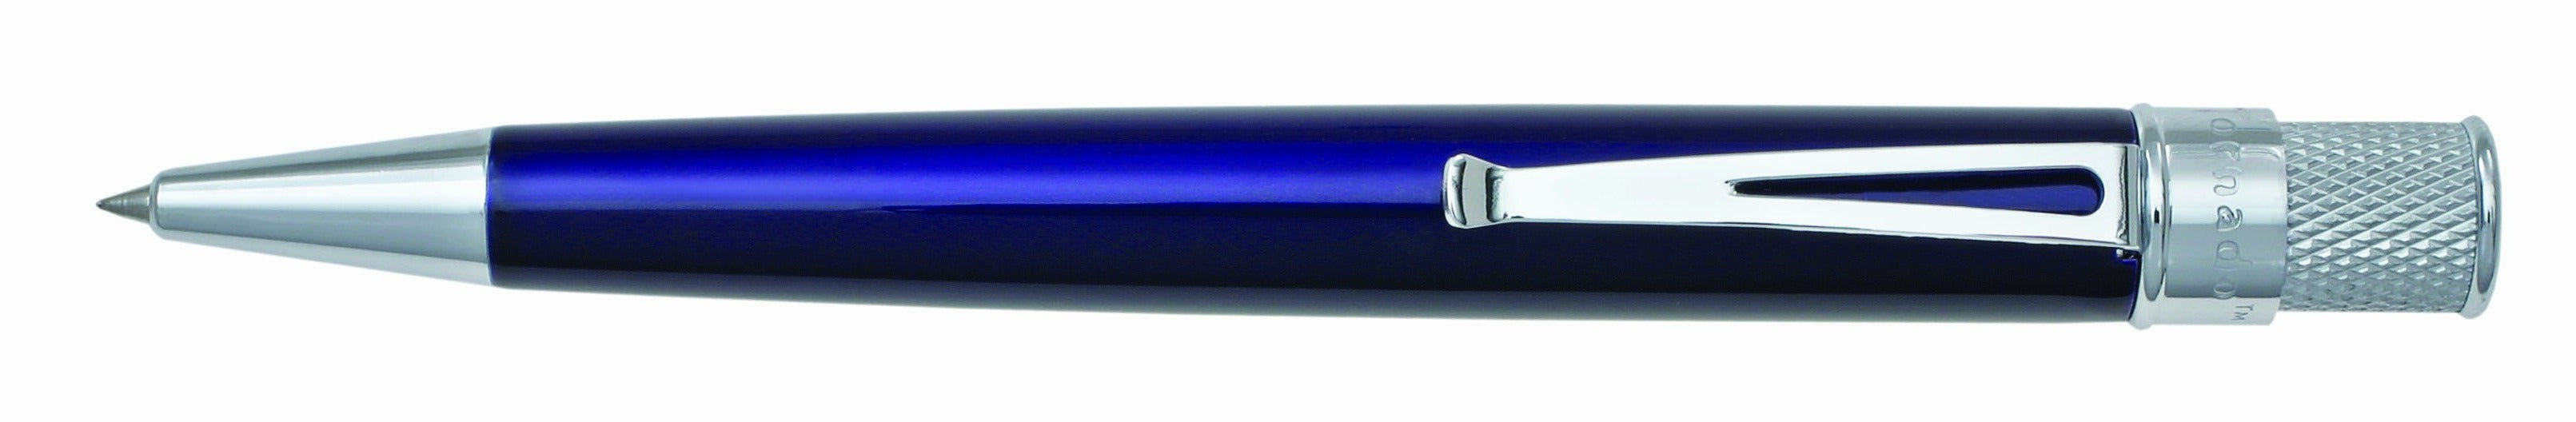 True blue stainless steel barrel with vibrant lacquers, knurl twist-top, packaged in pen stand